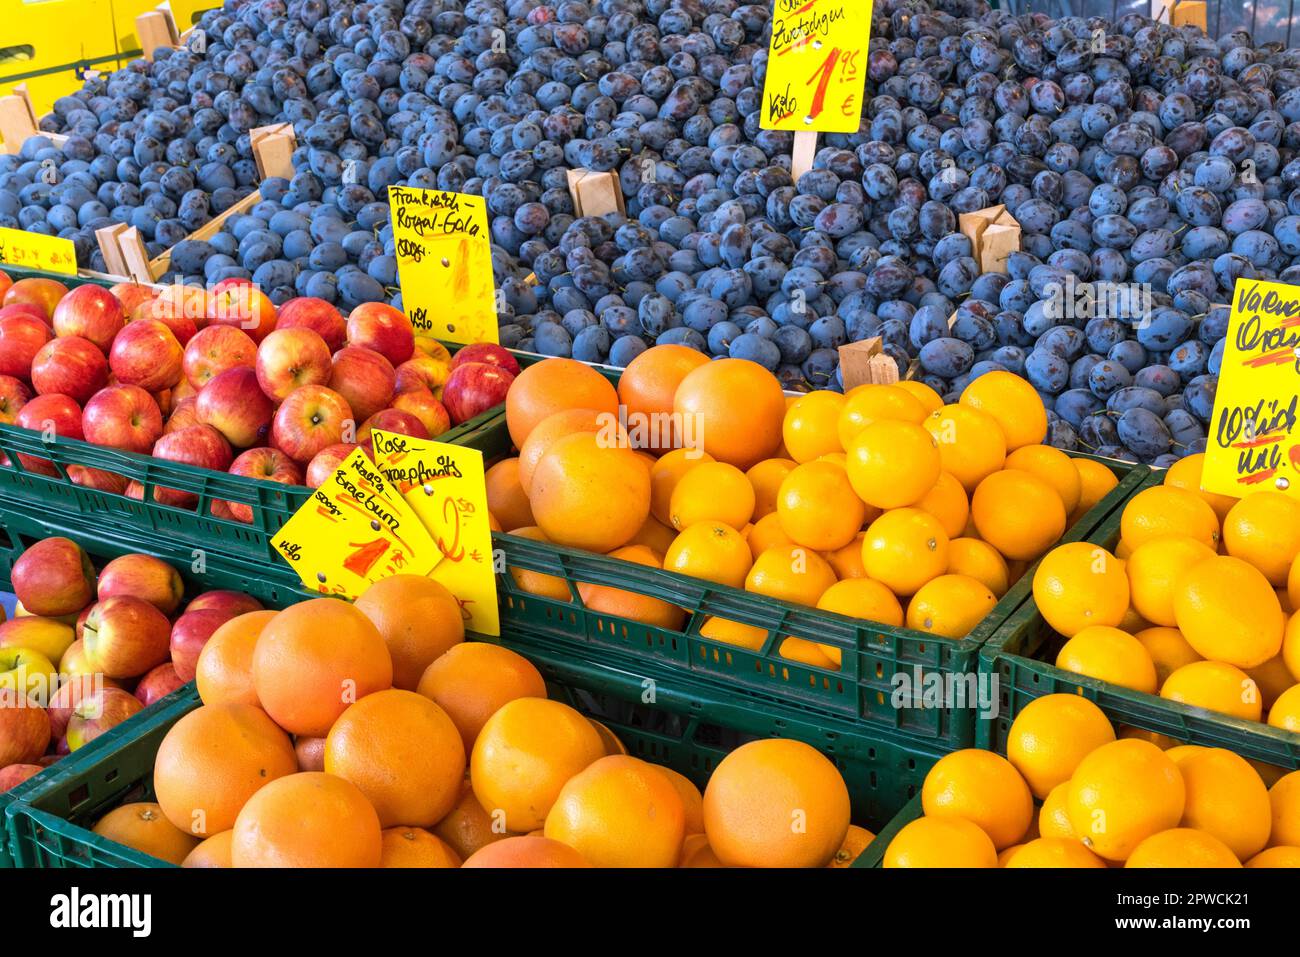 Plums, apples and oranges for sale at a market Stock Photo